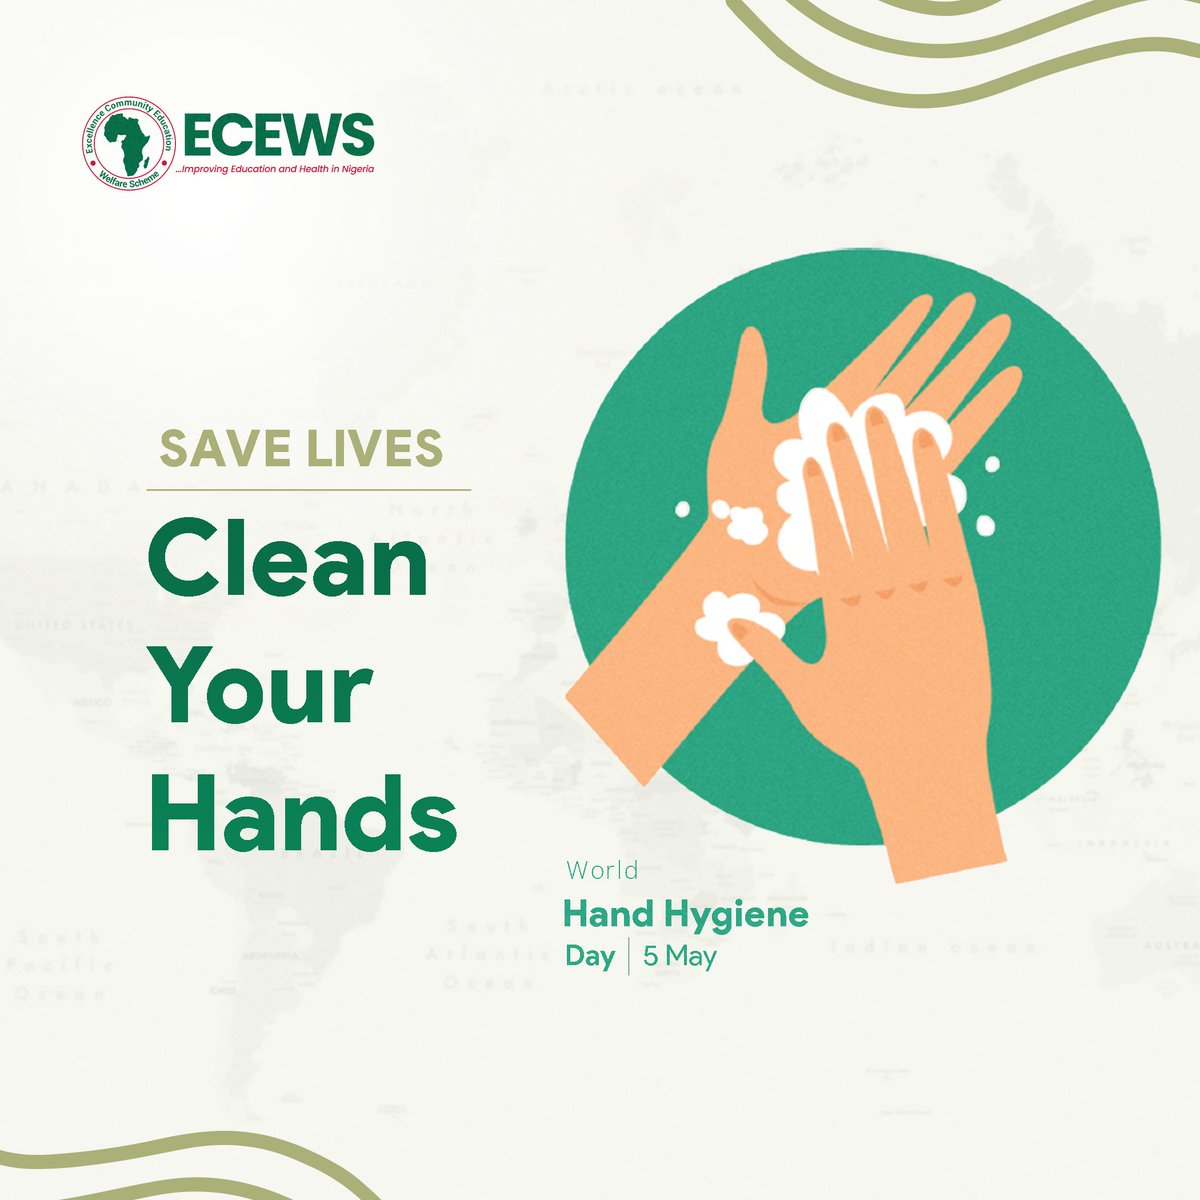 As we join the world in celebrating Hand Hygiene Day 2024, remember, clean hands save lives! Let's all do our part to promote good hand hygiene and prevent the spread of germs. #HappyHandHygieneDay #CleanHandsSaveLives #ECEWS